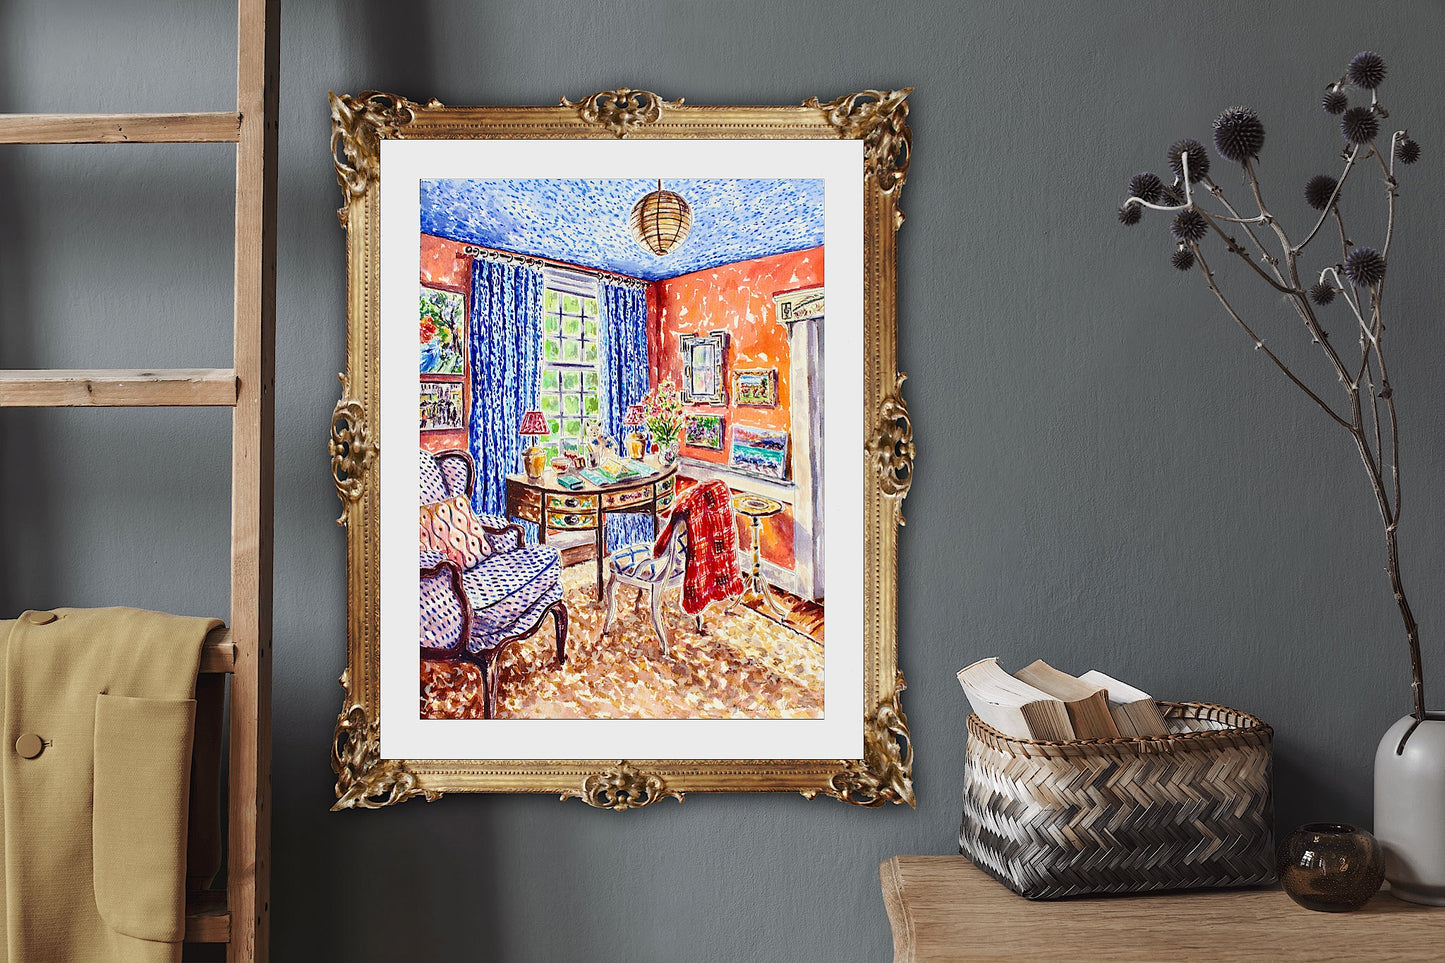 Memories, An Original 16" x 12" Watercolor And Ink Painting Of An Interior Scene With Blue And Orange